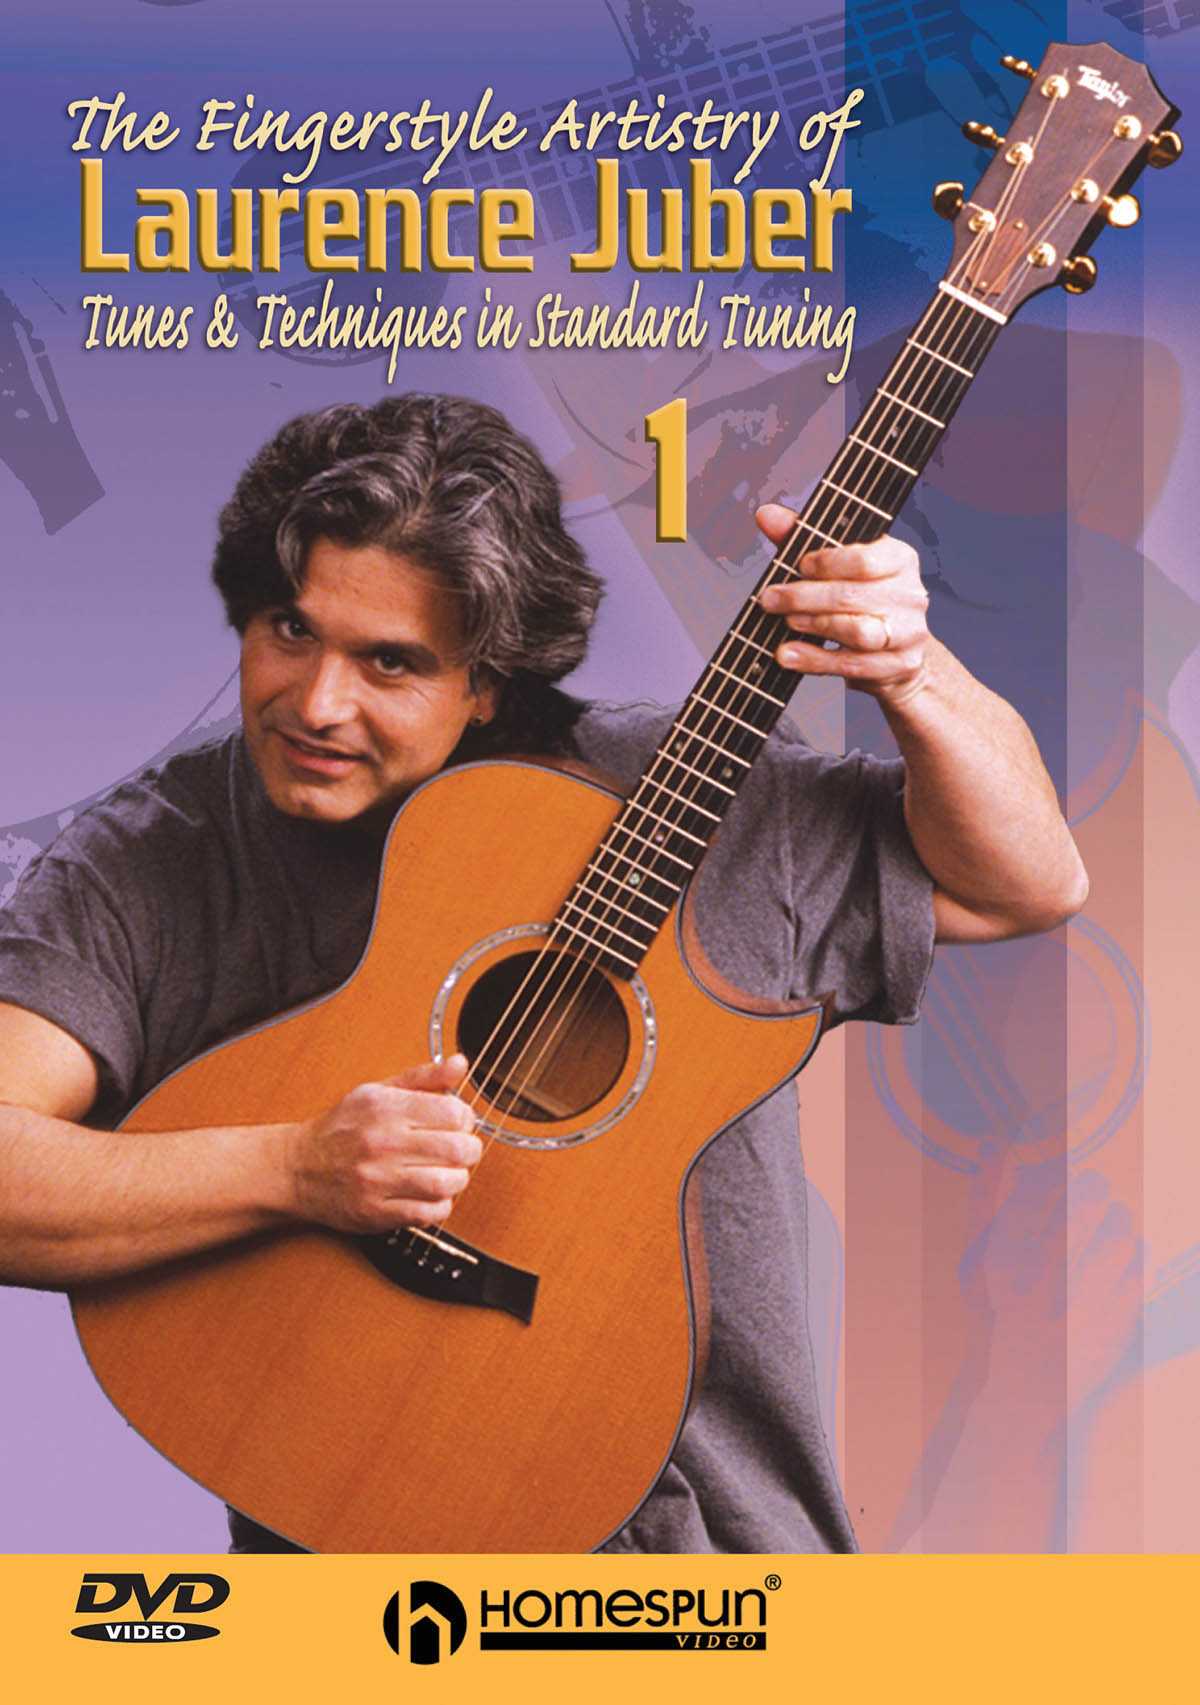 Image 1 of DVD-The Fingerstyle Artistry of Laurence Juber: Vol. 1 - Tunes & Techniques in Standard Tuning - SKU# 300-DVD264 : Product Type Media : Elderly Instruments